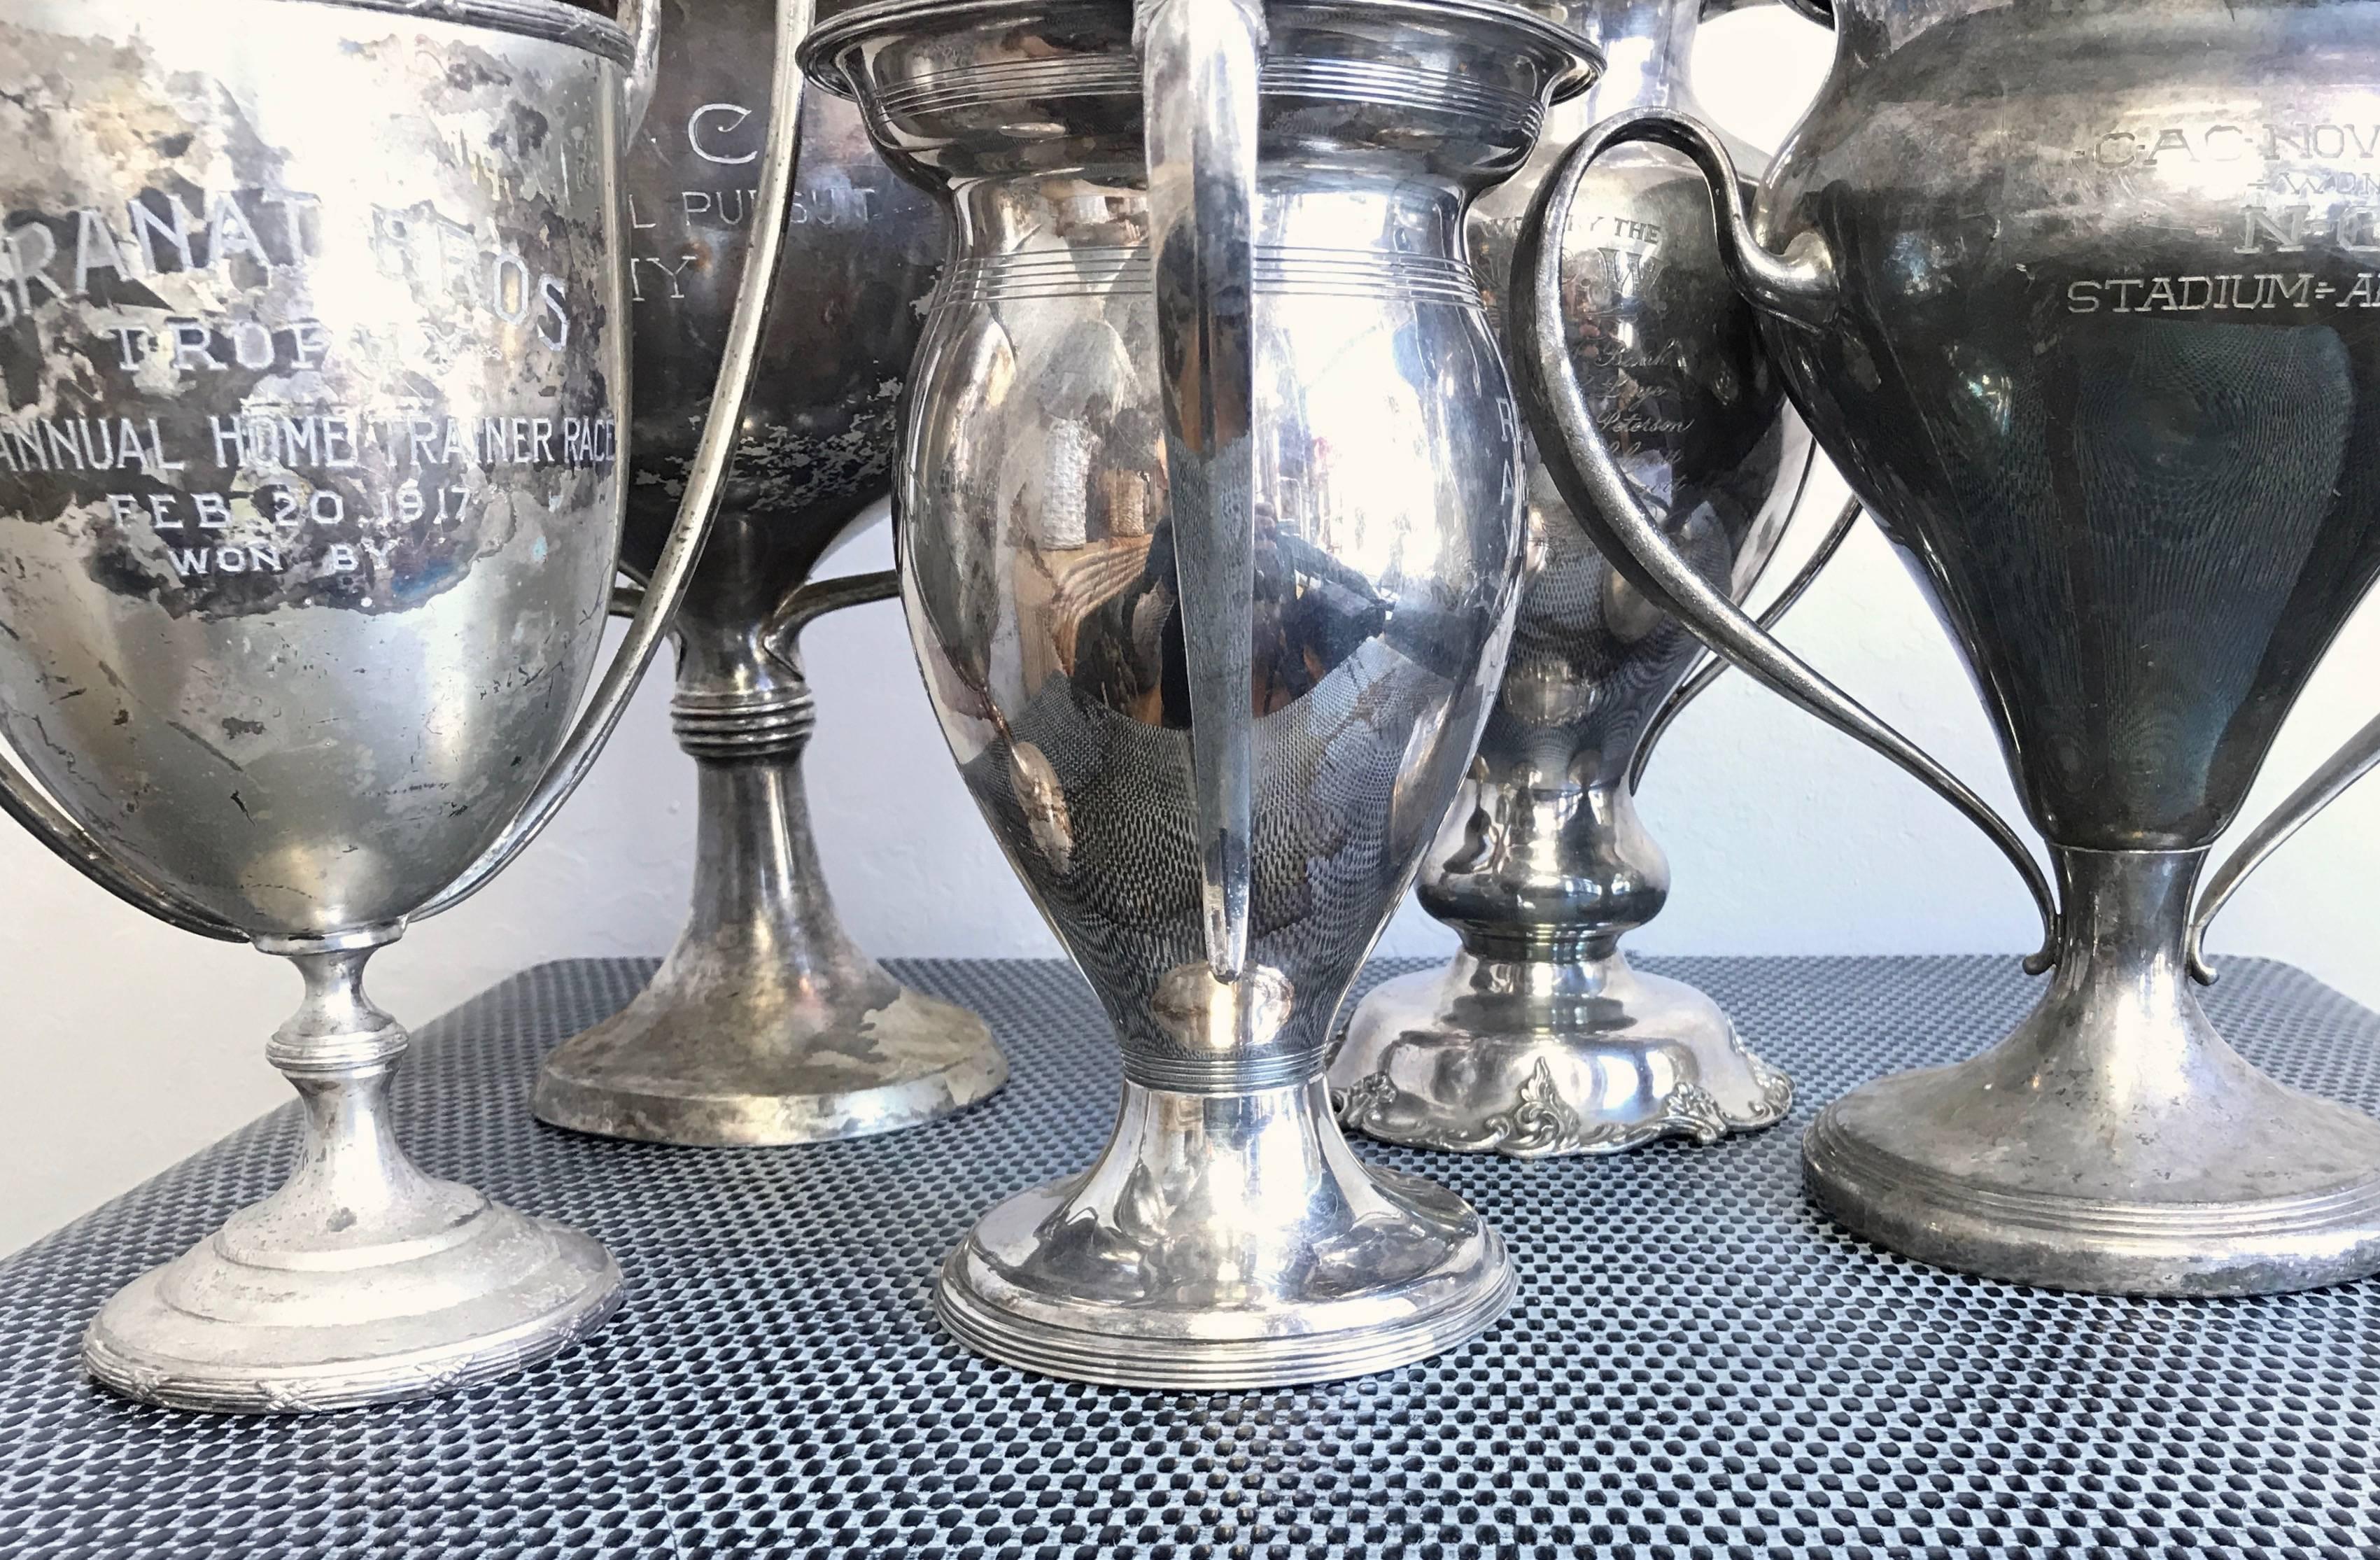 American Group of Five Early 1900s California Bay Area Silverplate Cycling Trophies